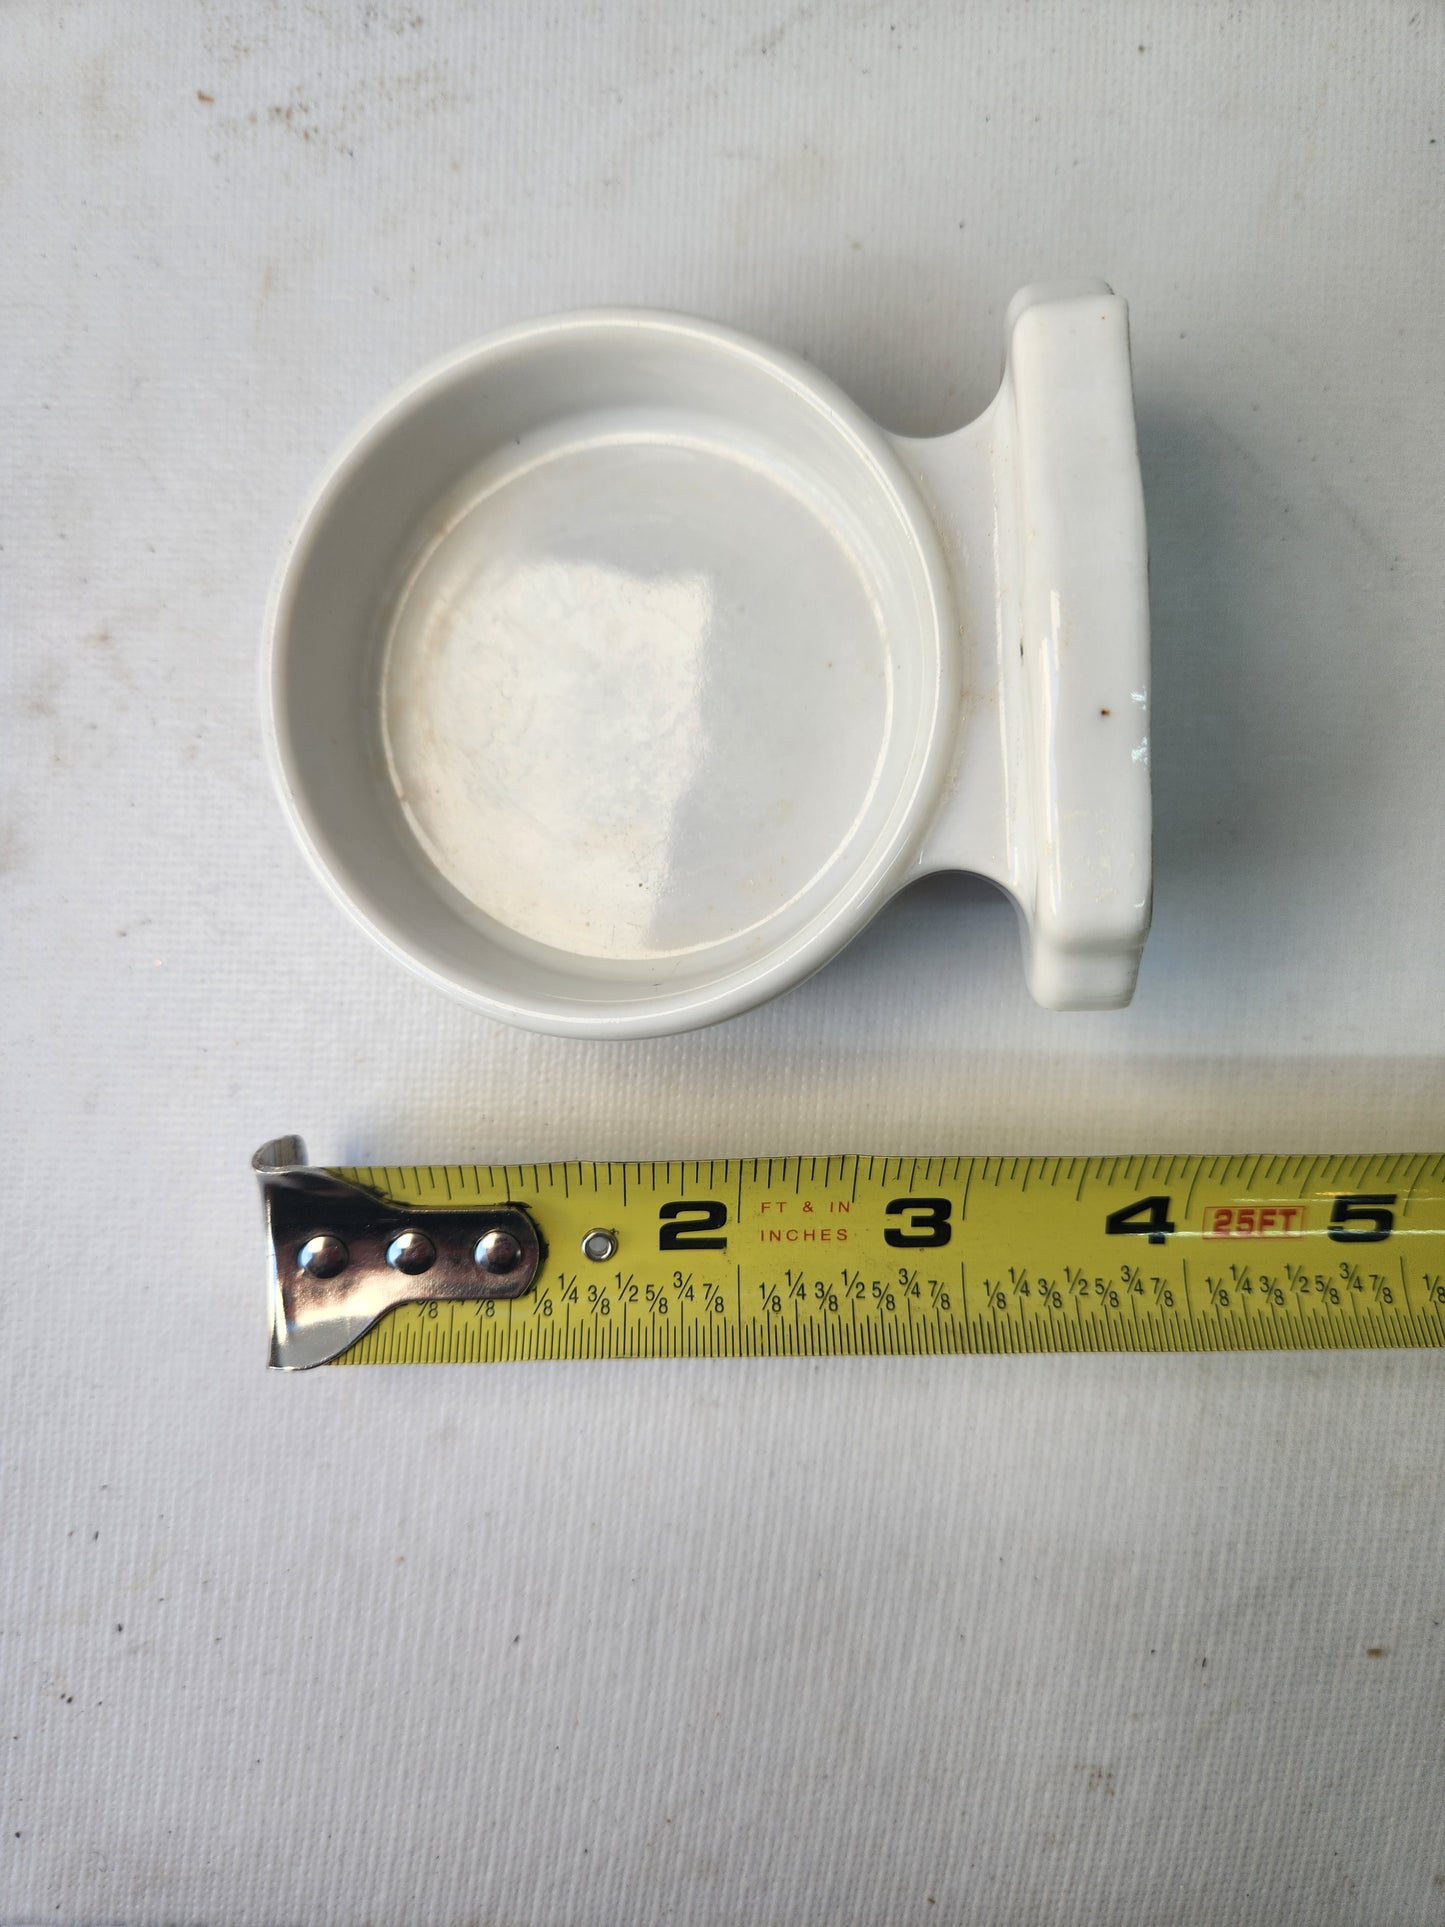 White Porcelain Bathroom Cup Holder or Soap Dish, 1930s Era Wall Mount Ceramic Cup Holder 113002